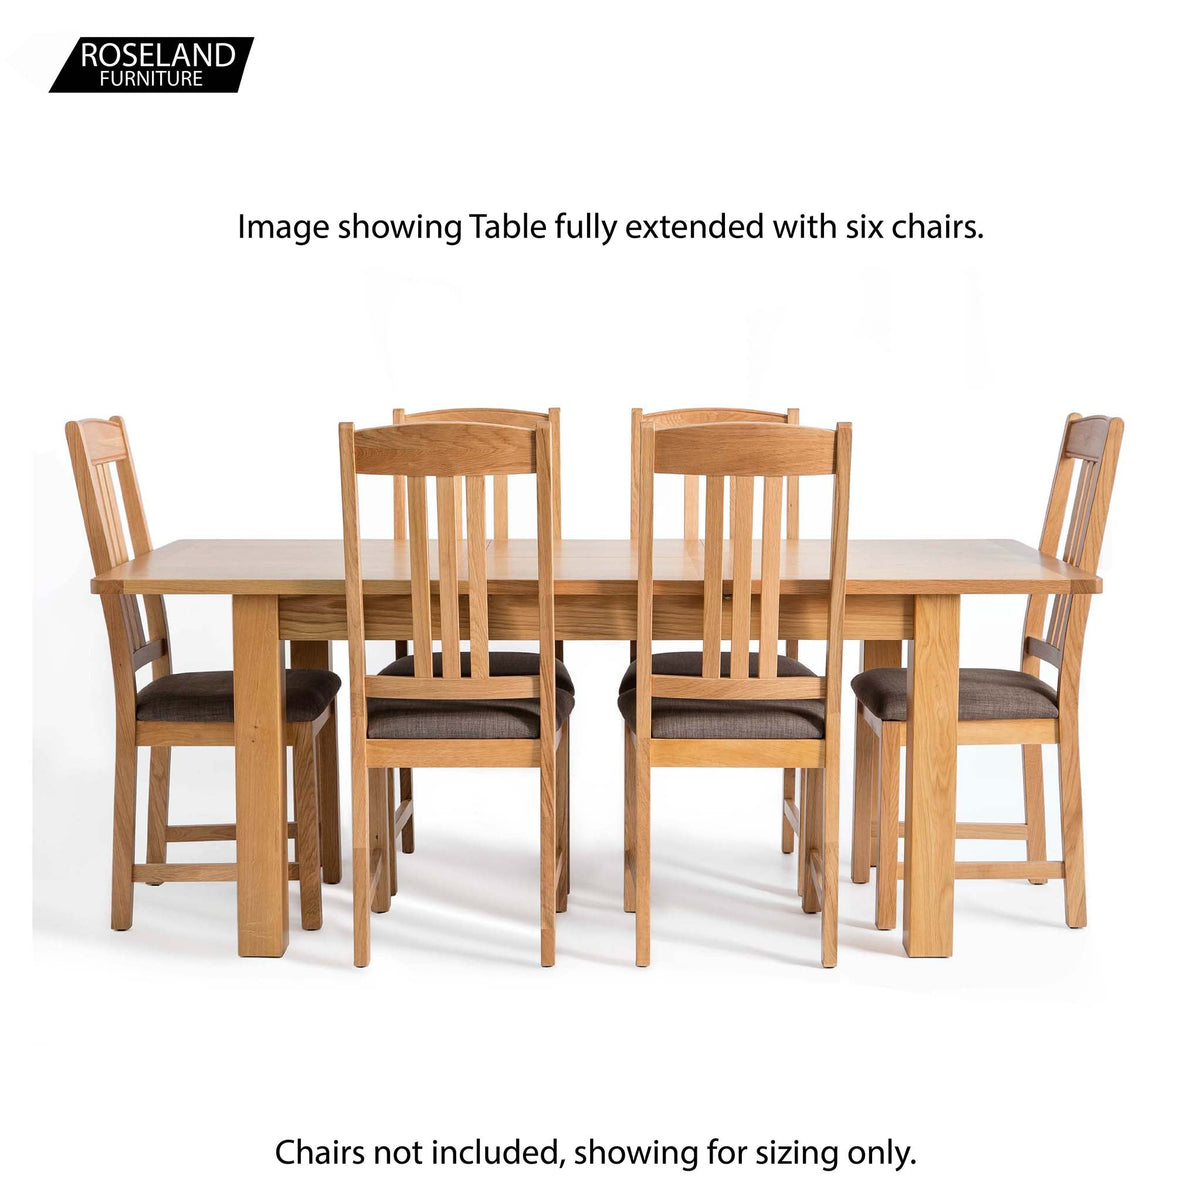 Hampshire Oak Small Extending Dining Table -  Showing fully extended table with chairs around